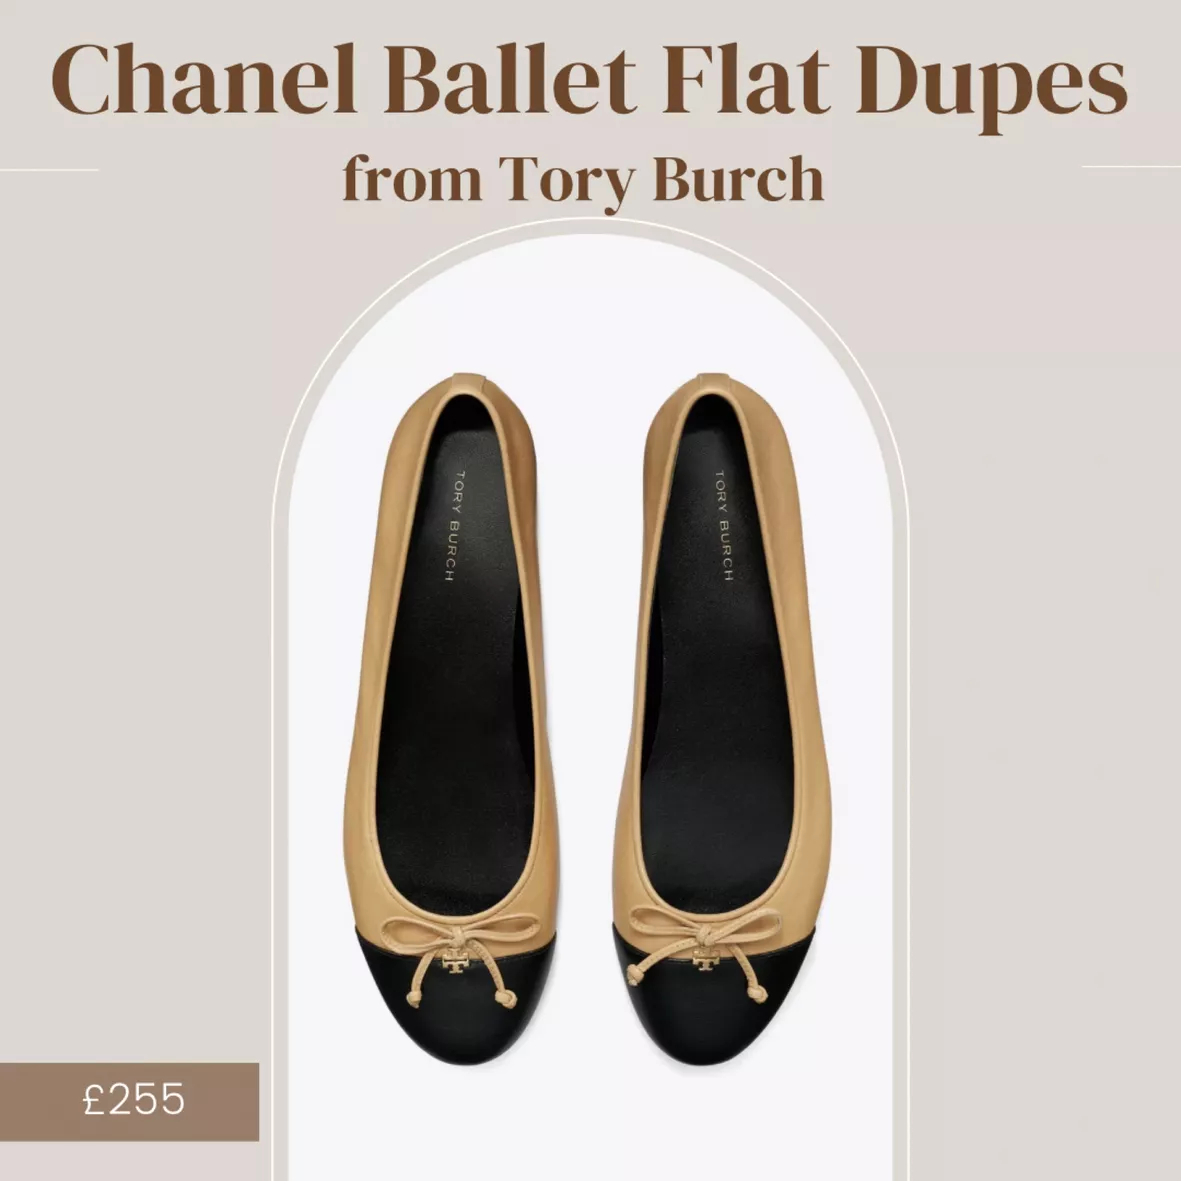 9 high street dupes of Chanel's cult chunky sandals - The Mail